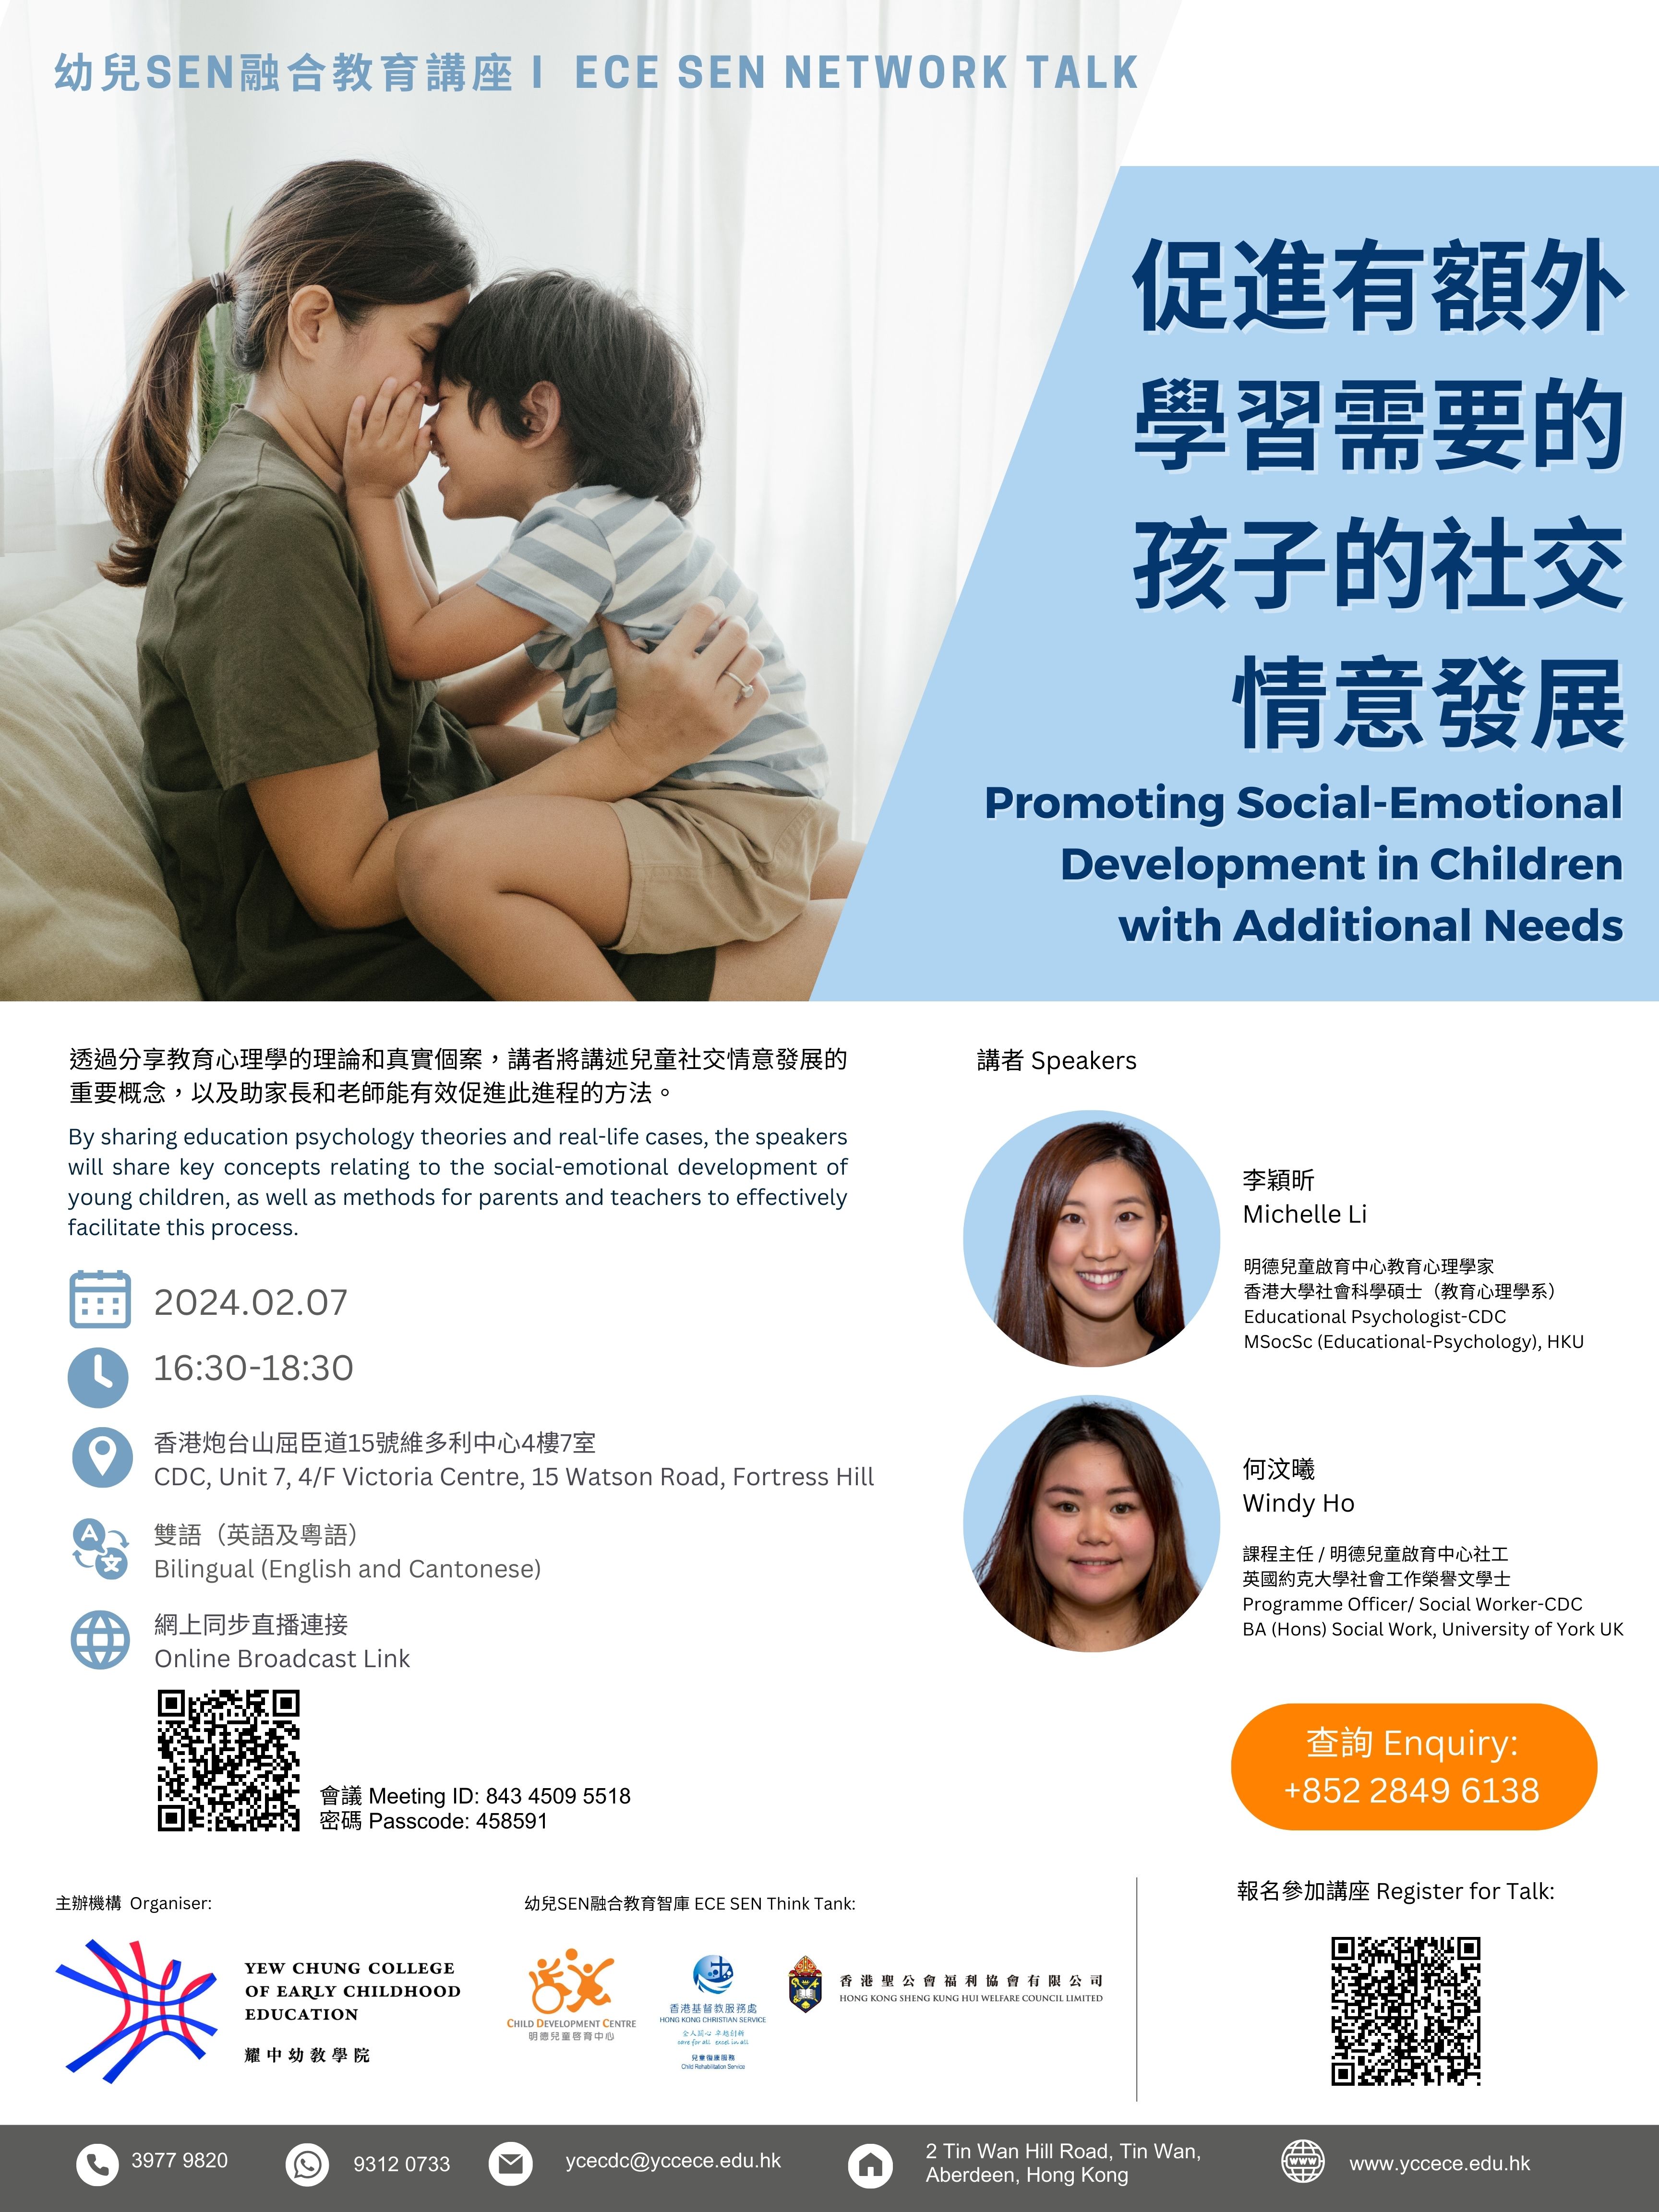 Promoting Social-Emotional Development in Children with Additional Needs